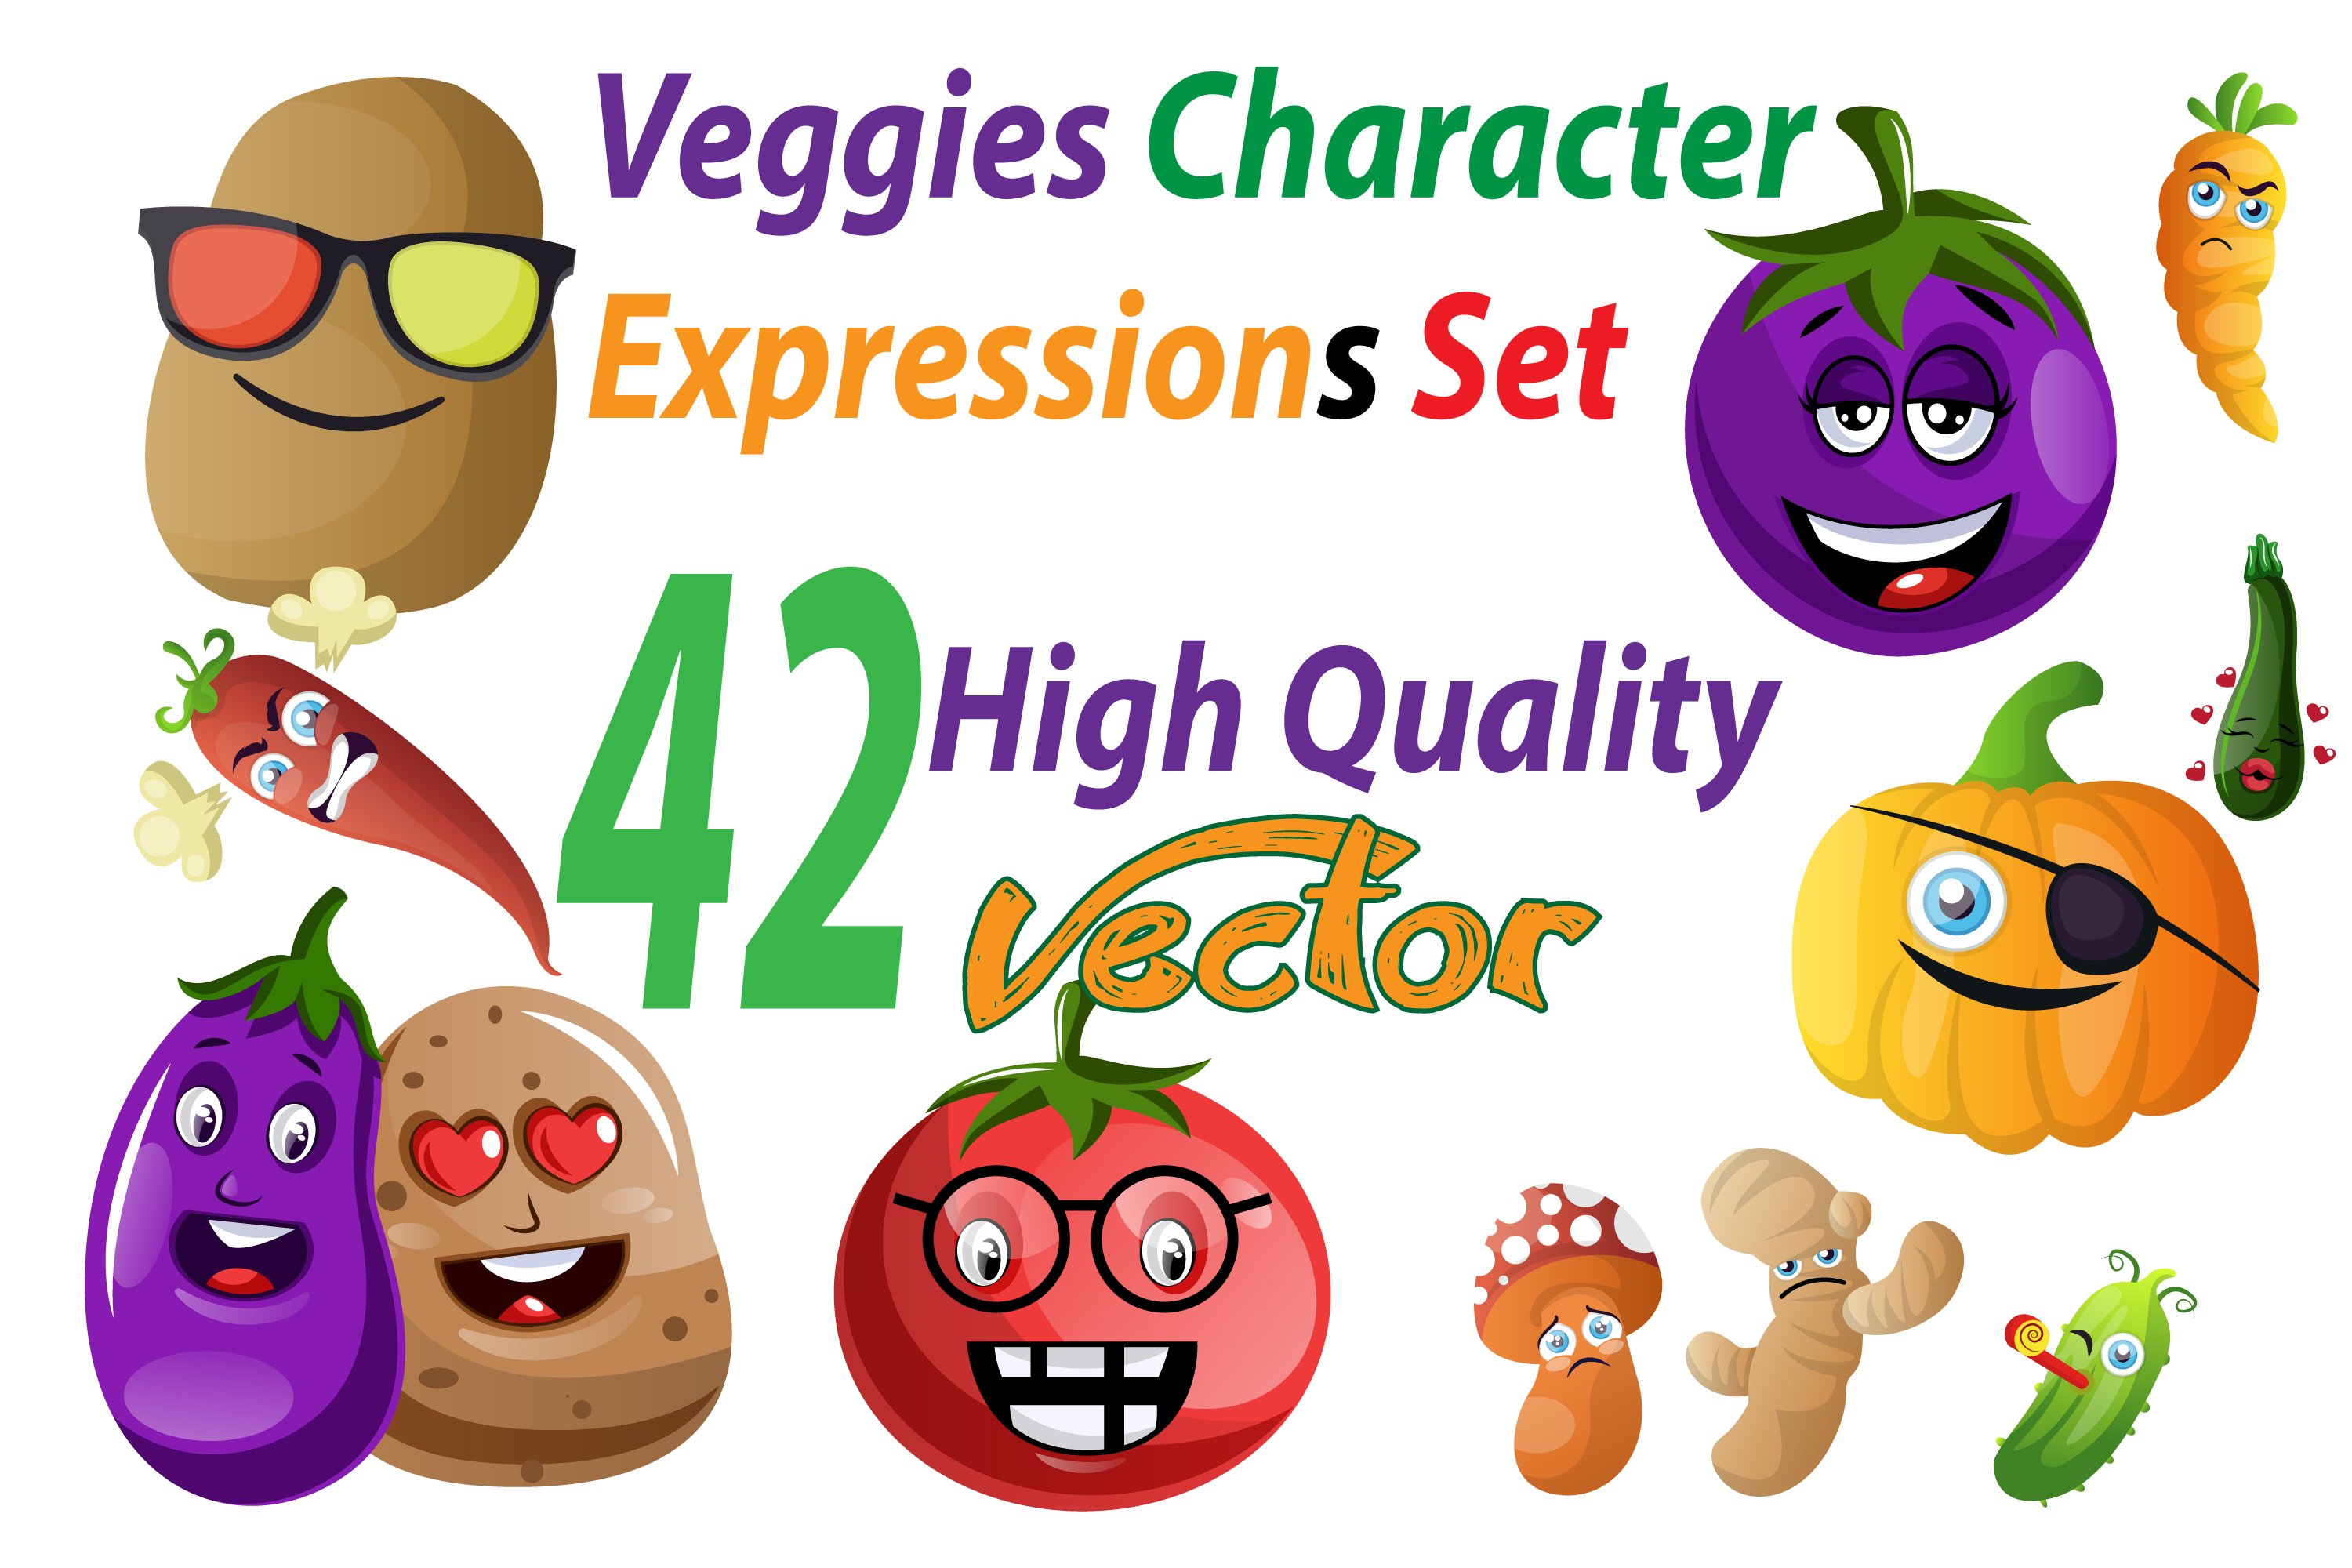 Some veggies elements for you.